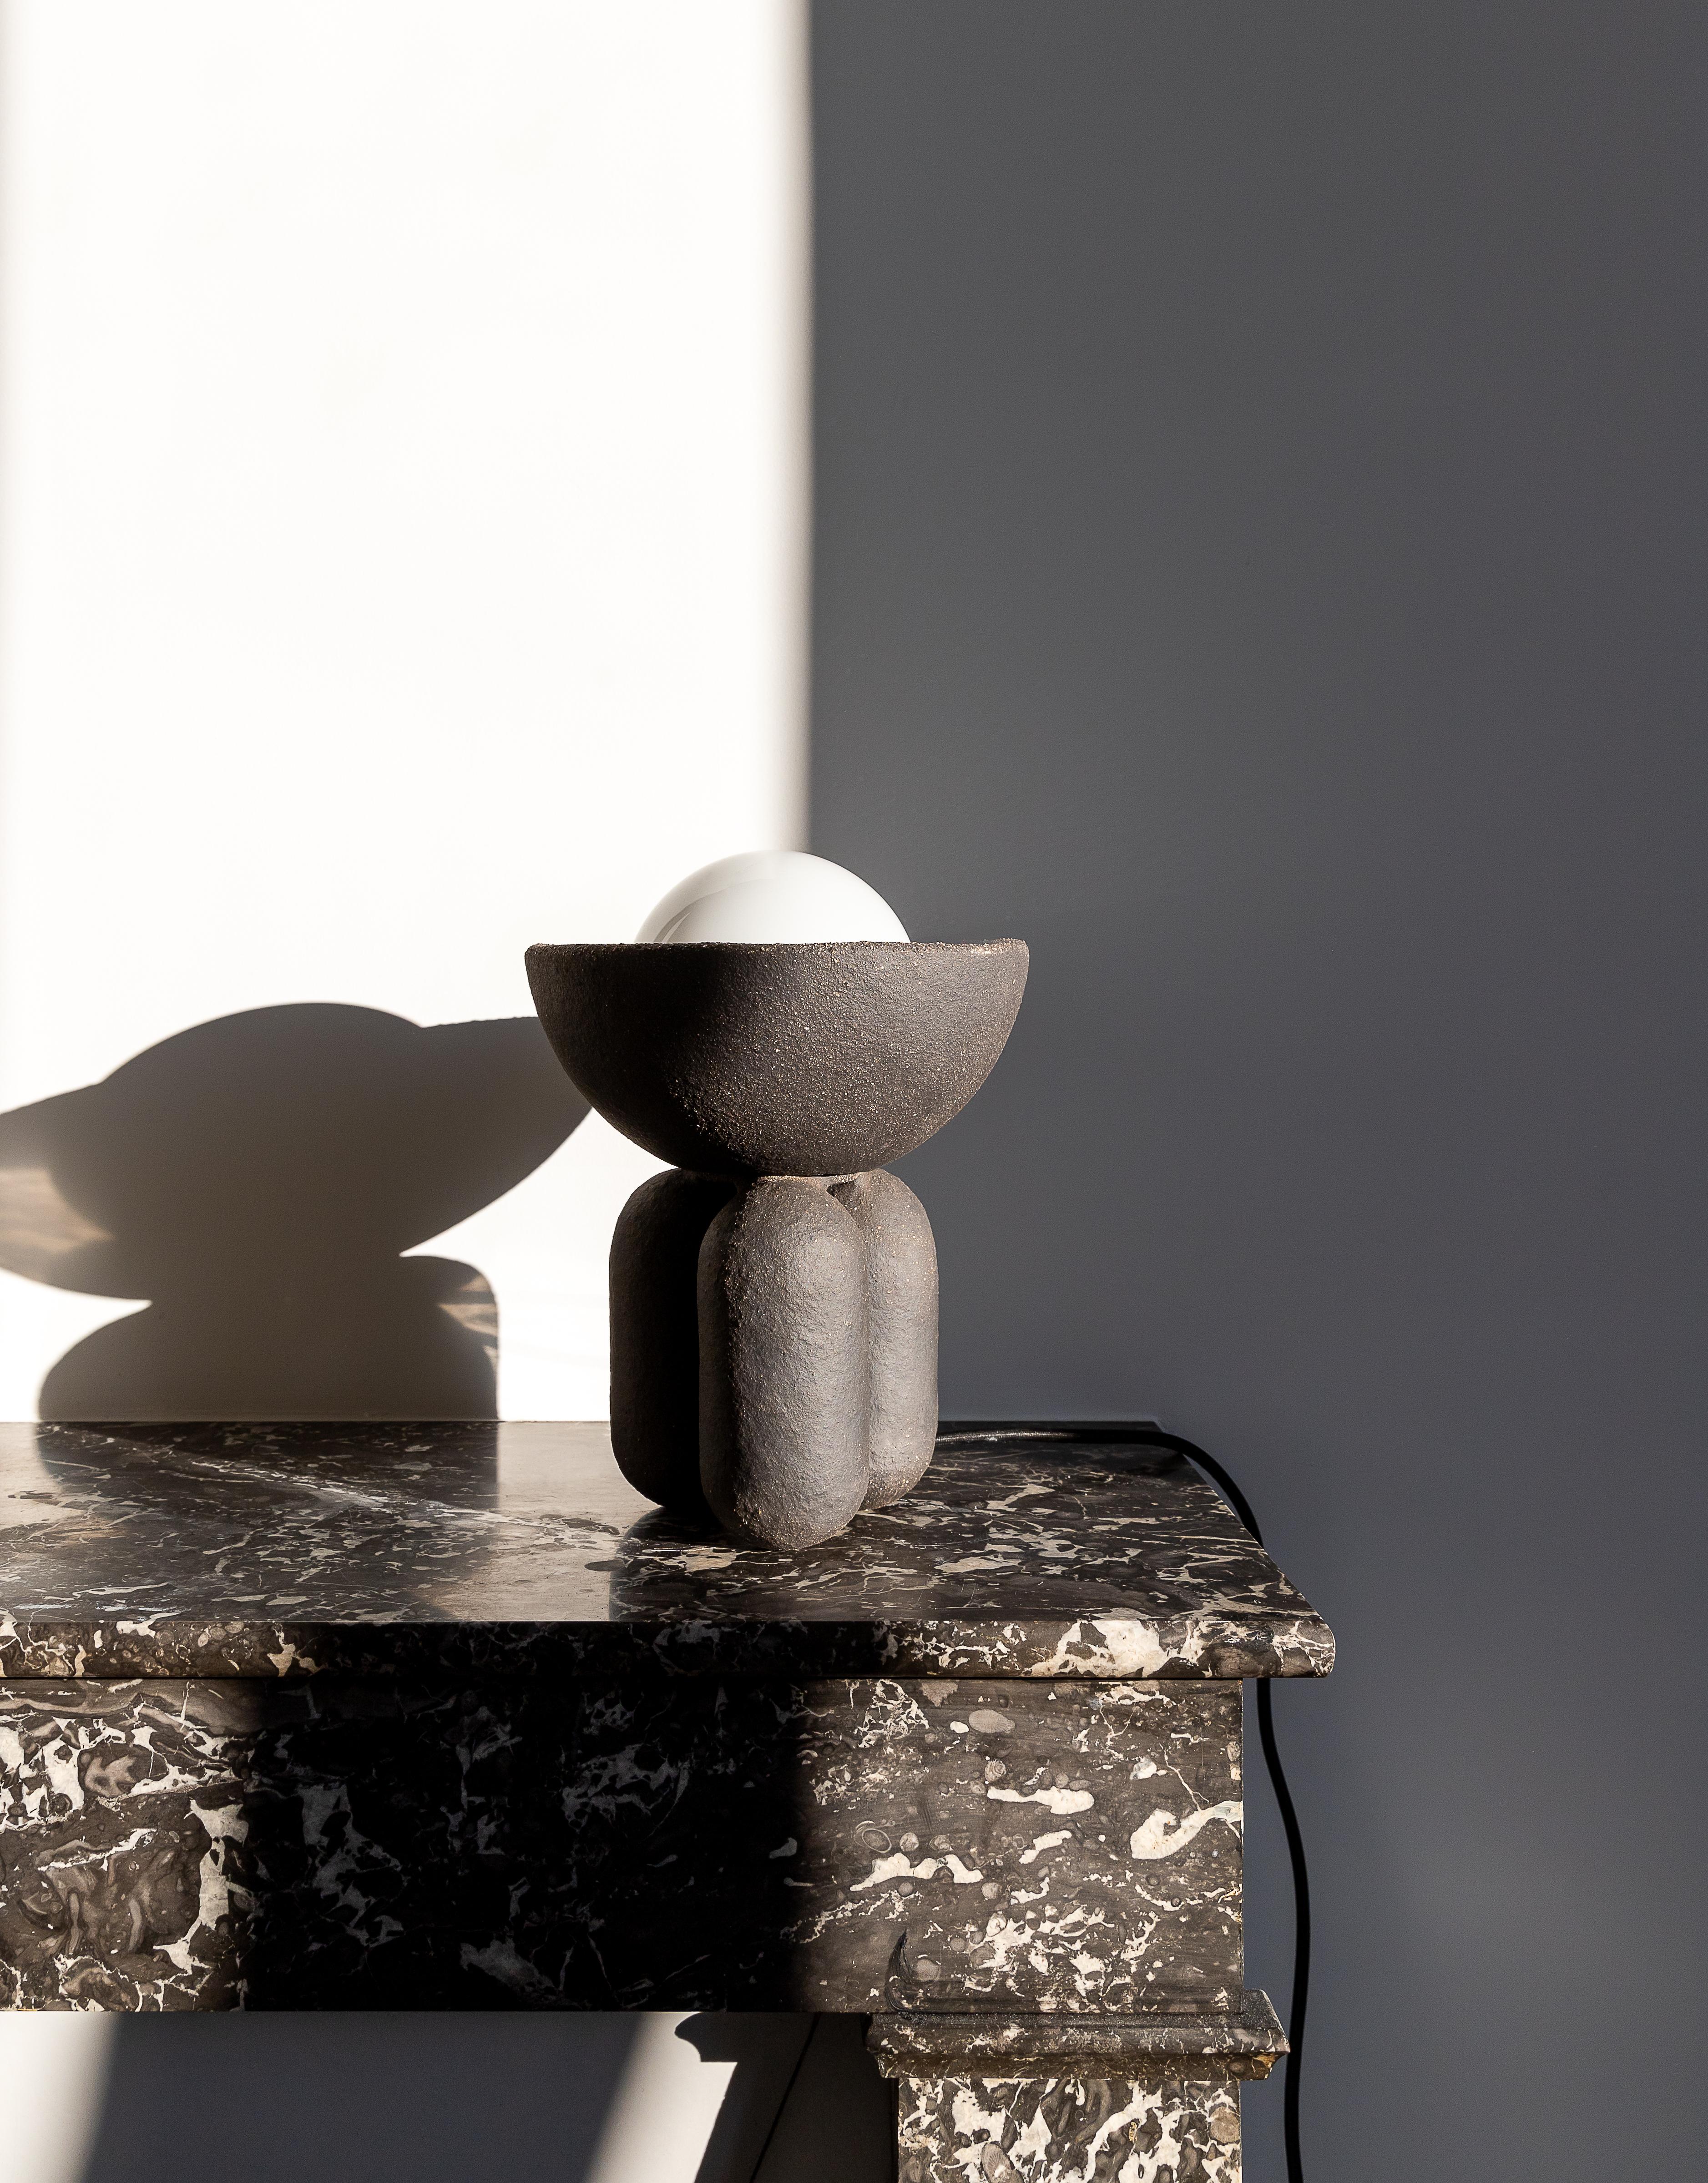 Black small half sphere lamp by Lisa Allegra
Dimensions: Ø 20 x 27 cm
Materials: Clay
Also available in dusty pink finish.
Born in 1986 in Paris, Lisa Allegra has earned in 2010 a degree in furniture design from the École Supérieure des Arts